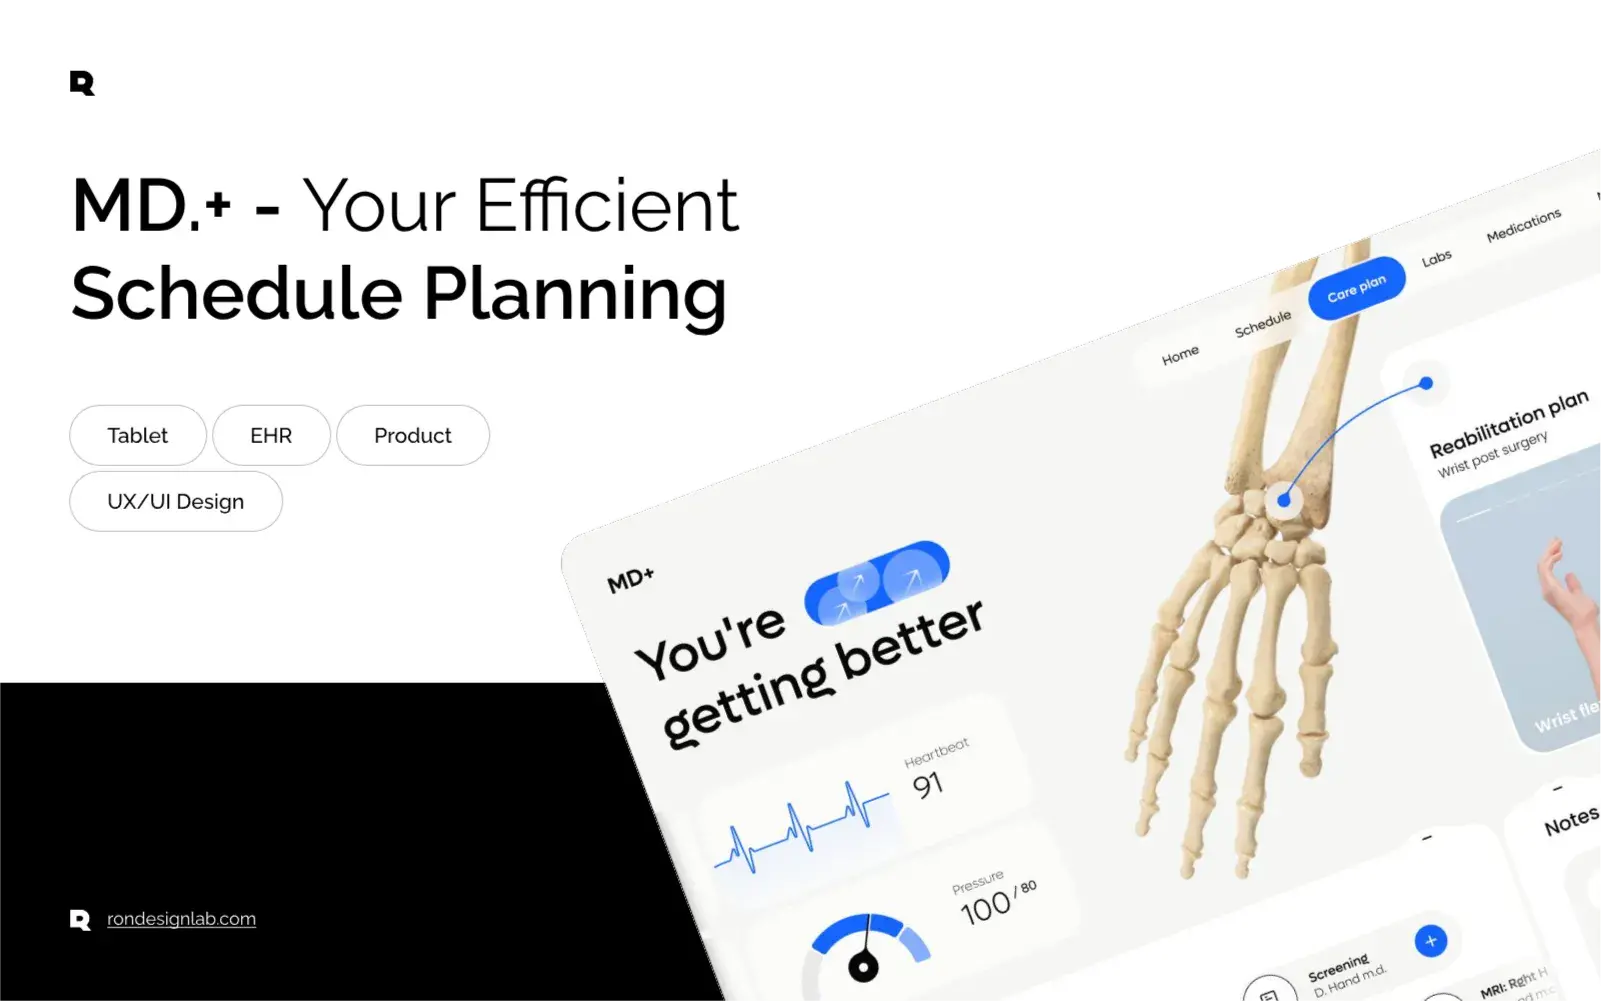 MD.+ - Your Efficient Schedule Planning - Business